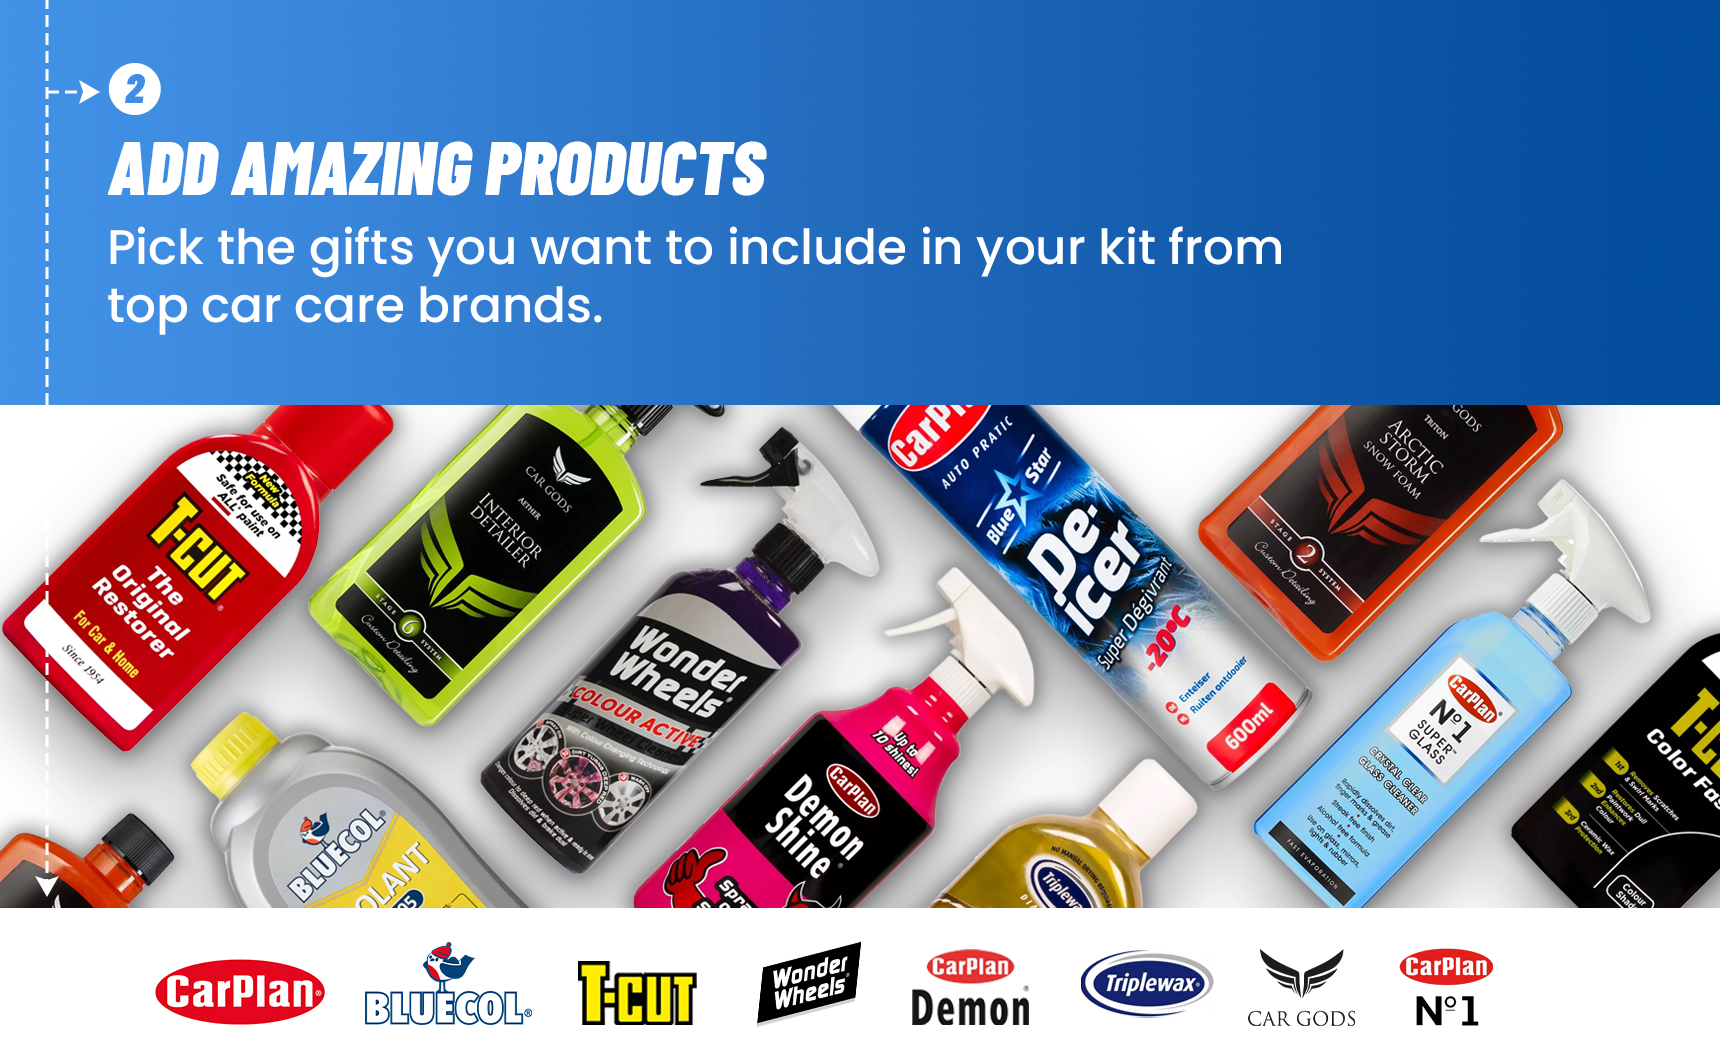 Step 2 - Add amazing products. Pick 6 products to include. Image of top car care products.